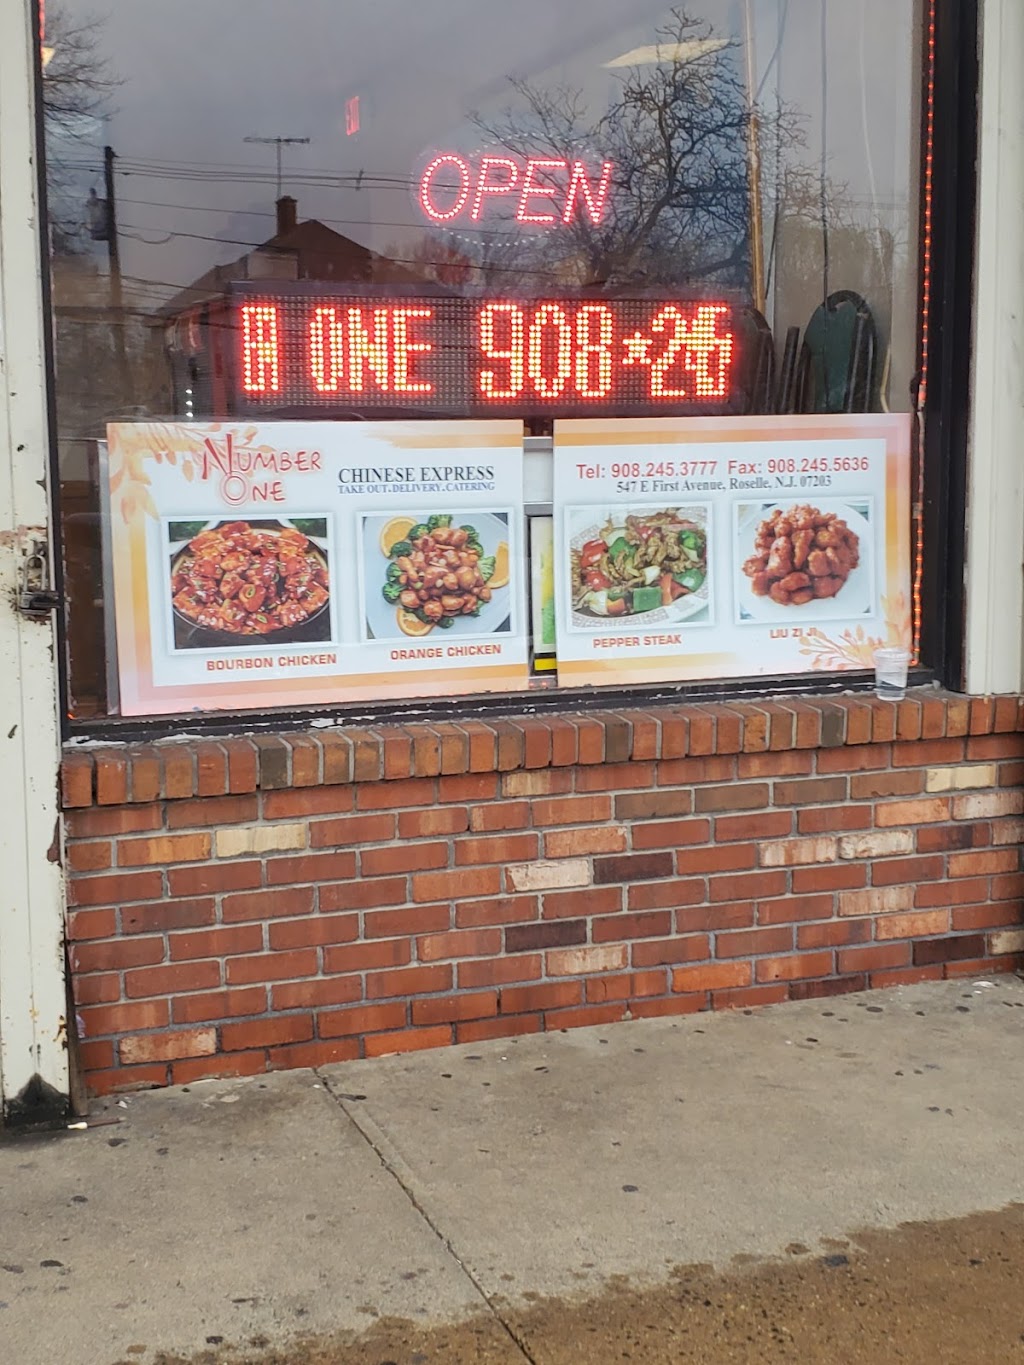 Number 1 Chinese Express | 547 E 1st Ave, Roselle, NJ 07203 | Phone: (908) 245-3777